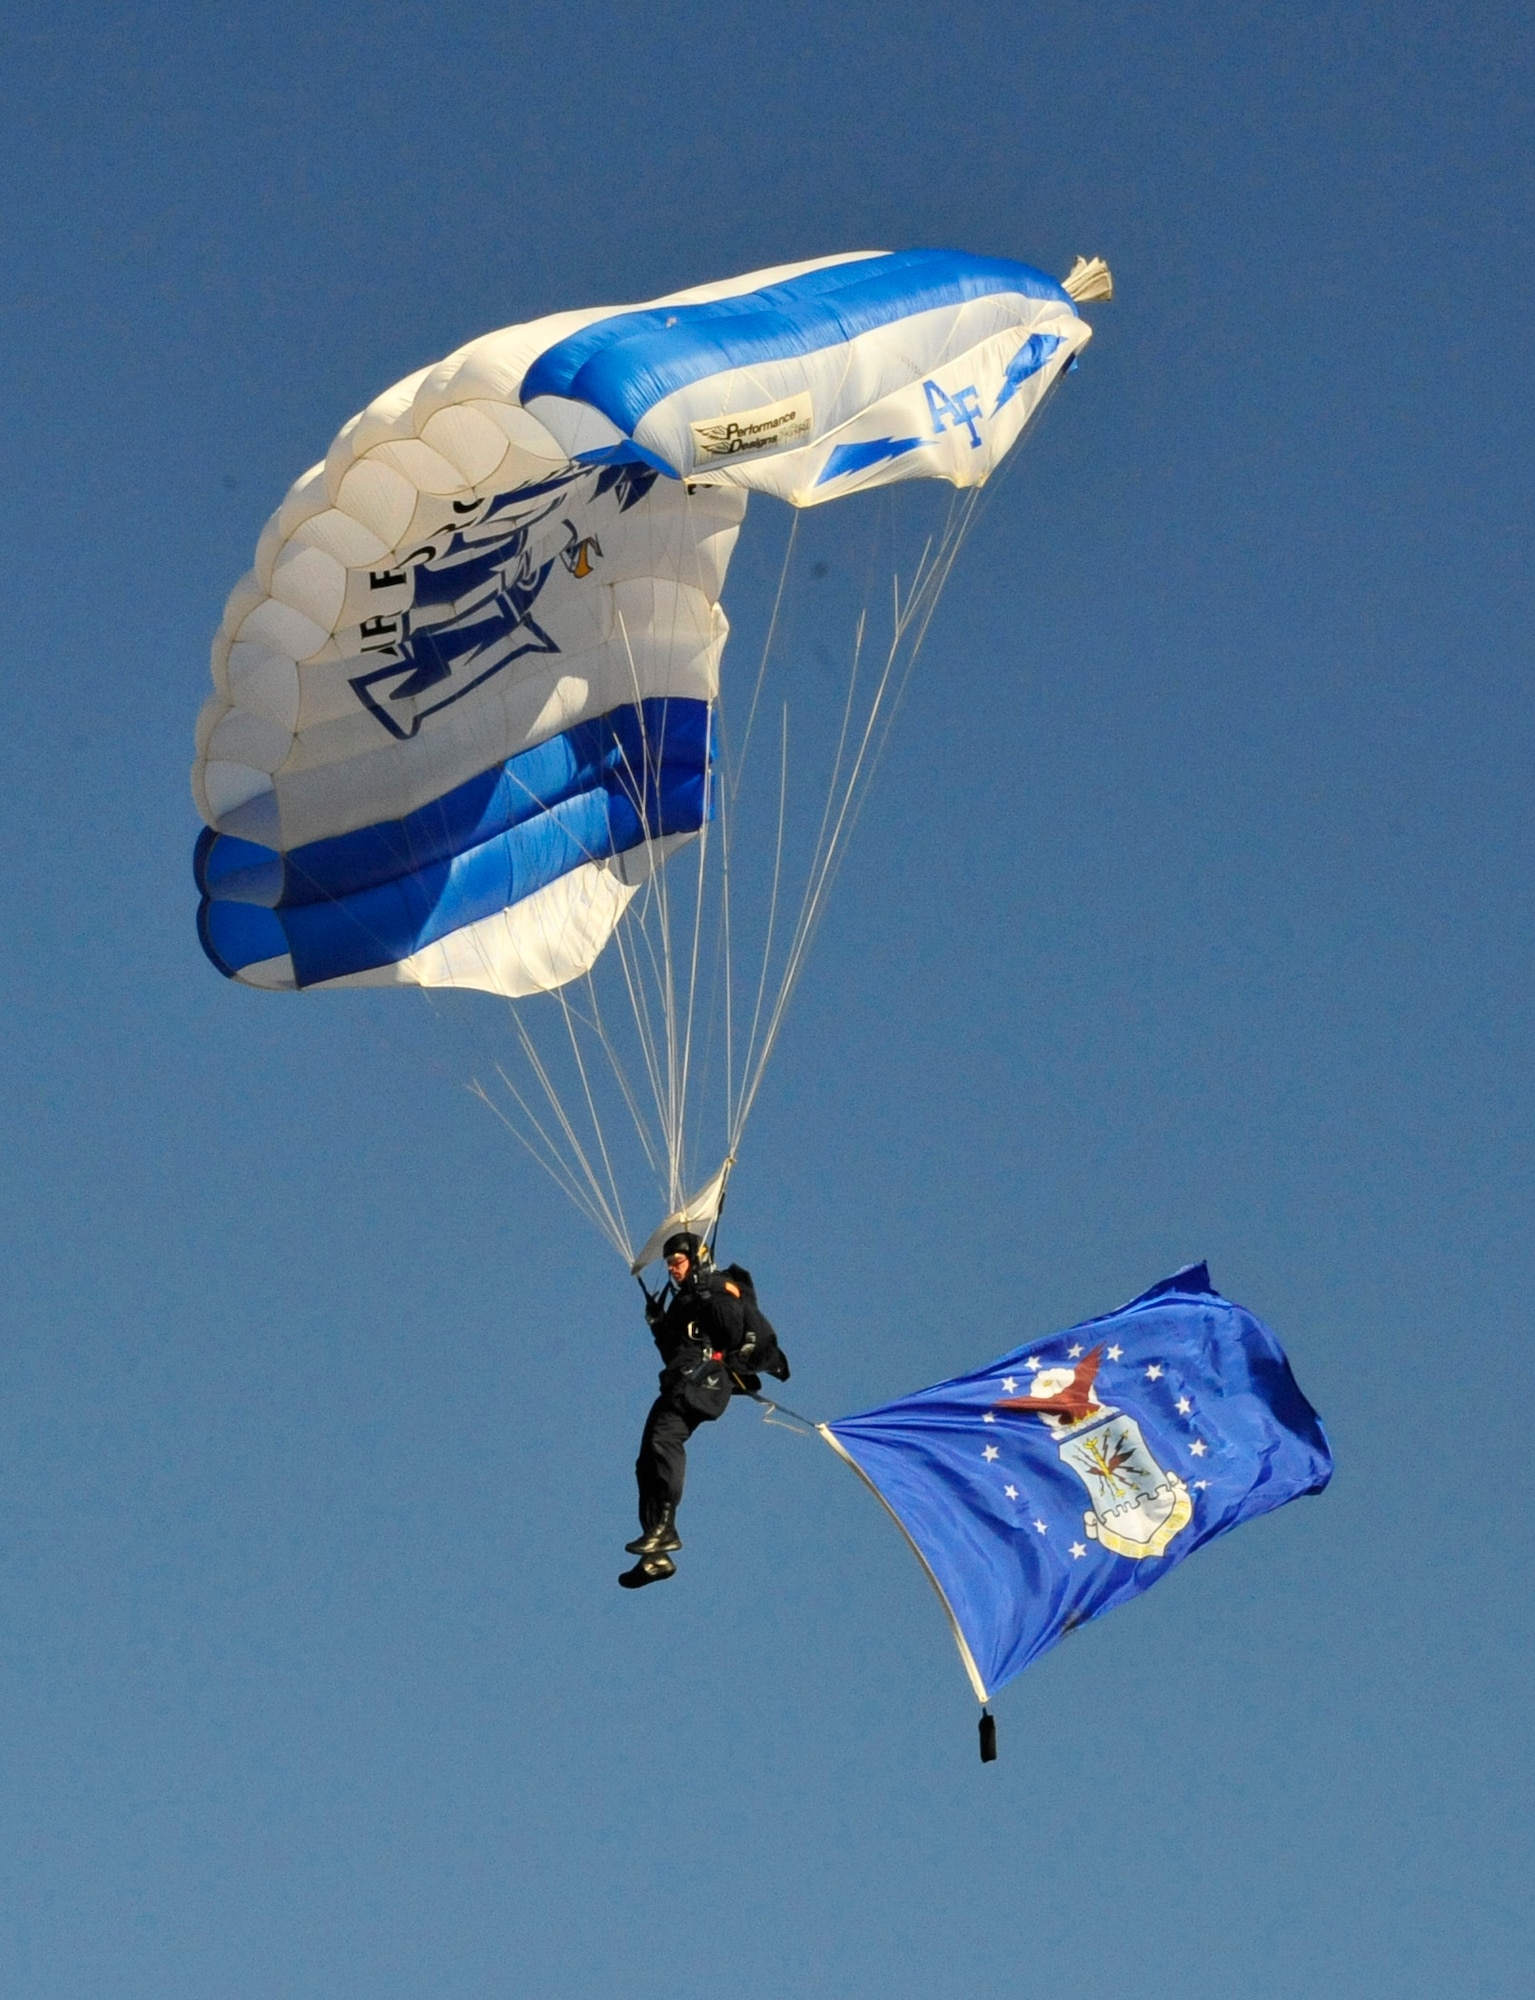 An Air Force Wings of Blue member glides down with the service's flag Friday at the Litchfield Golf Course in Litchfield Park, Ariz. Wings of Blue members practiced jumping in preparation for Saturday's Buffalo Wings Bowl at Arizona State University's Sun Devil Stadium in Tempe, Ariz. (U.S. Air Force photo/Senior Airman Grace Lee)